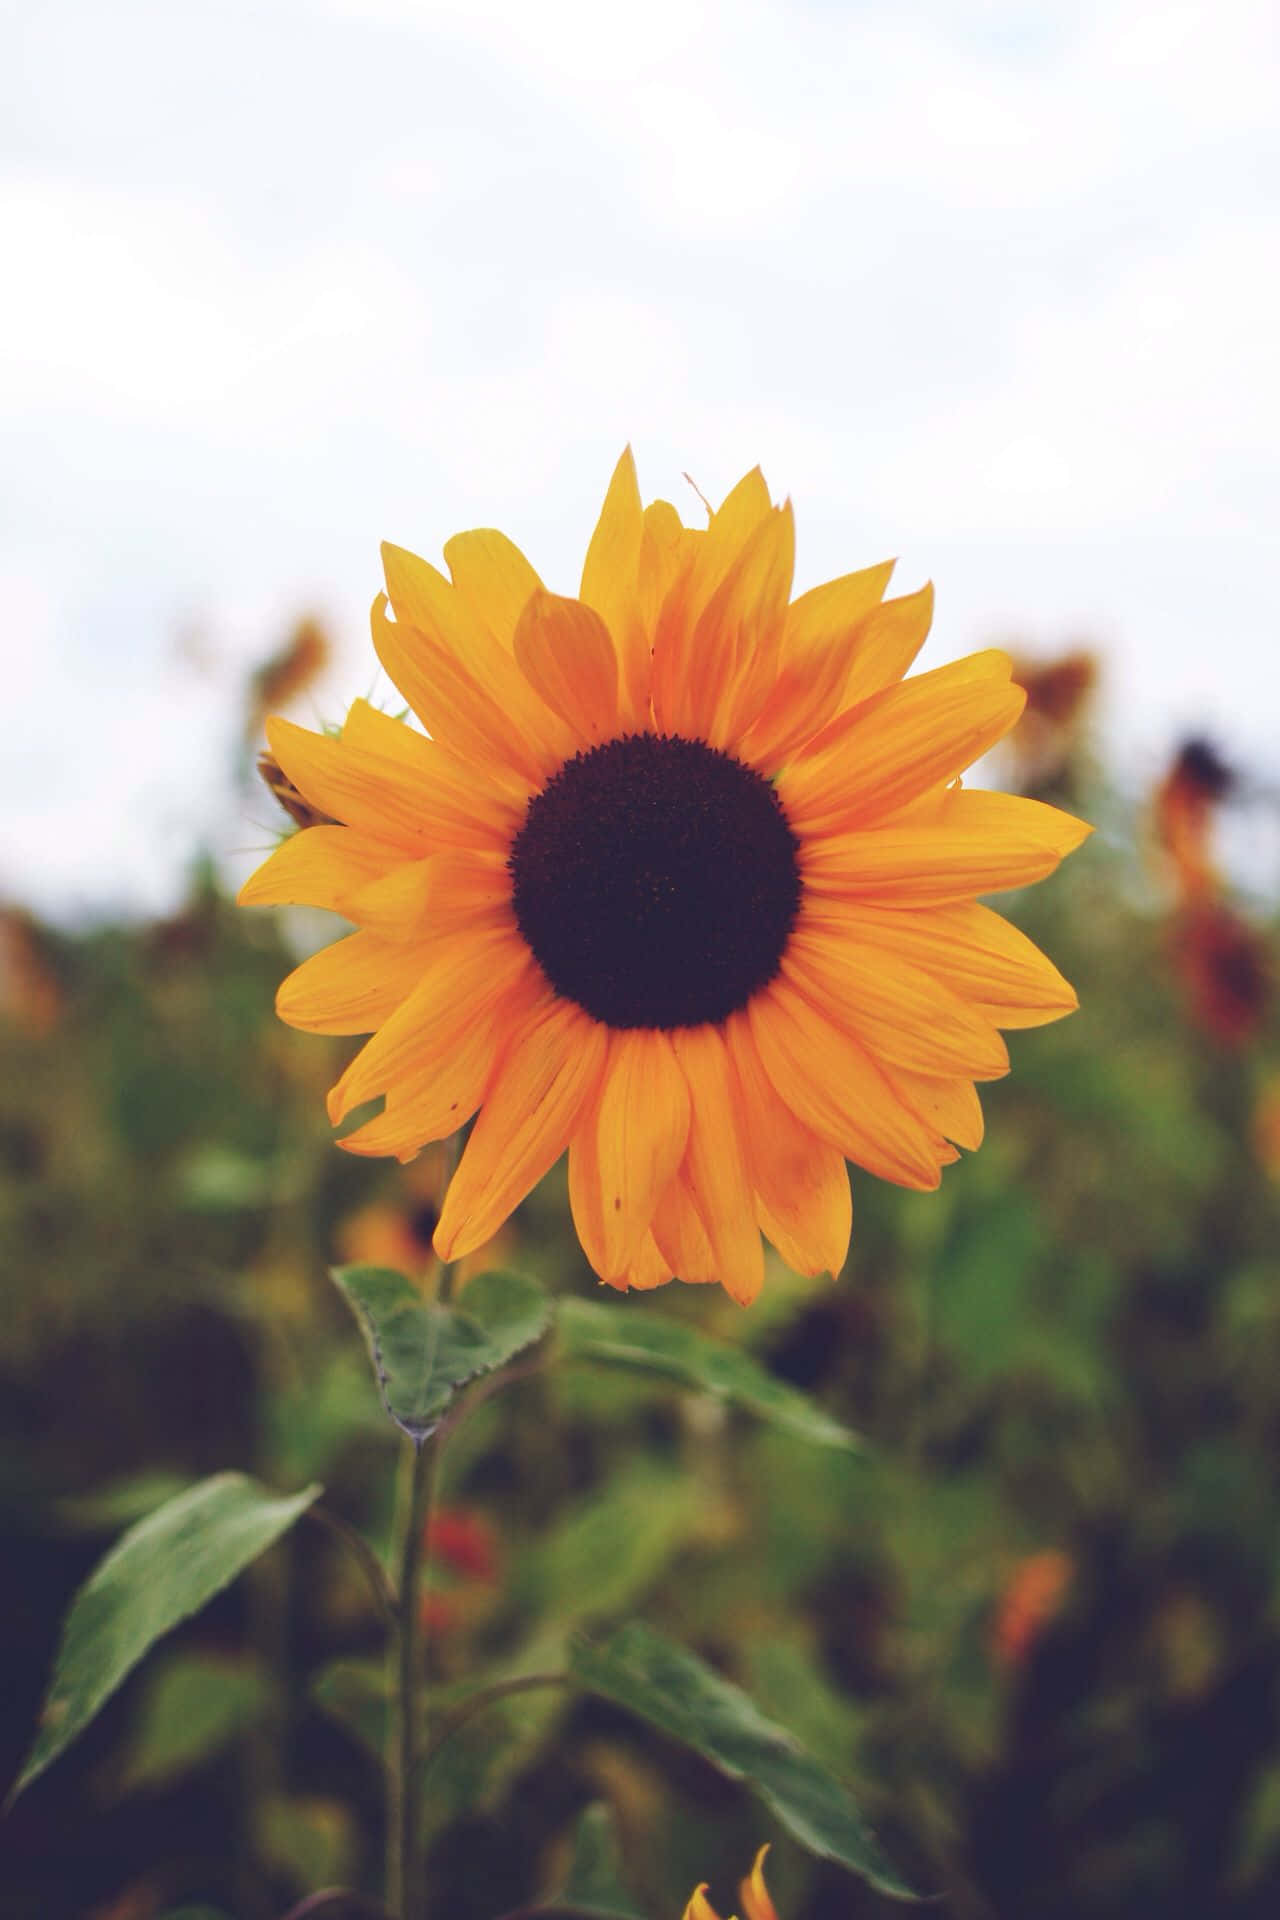 a sunflower in a field with a cloudy sky